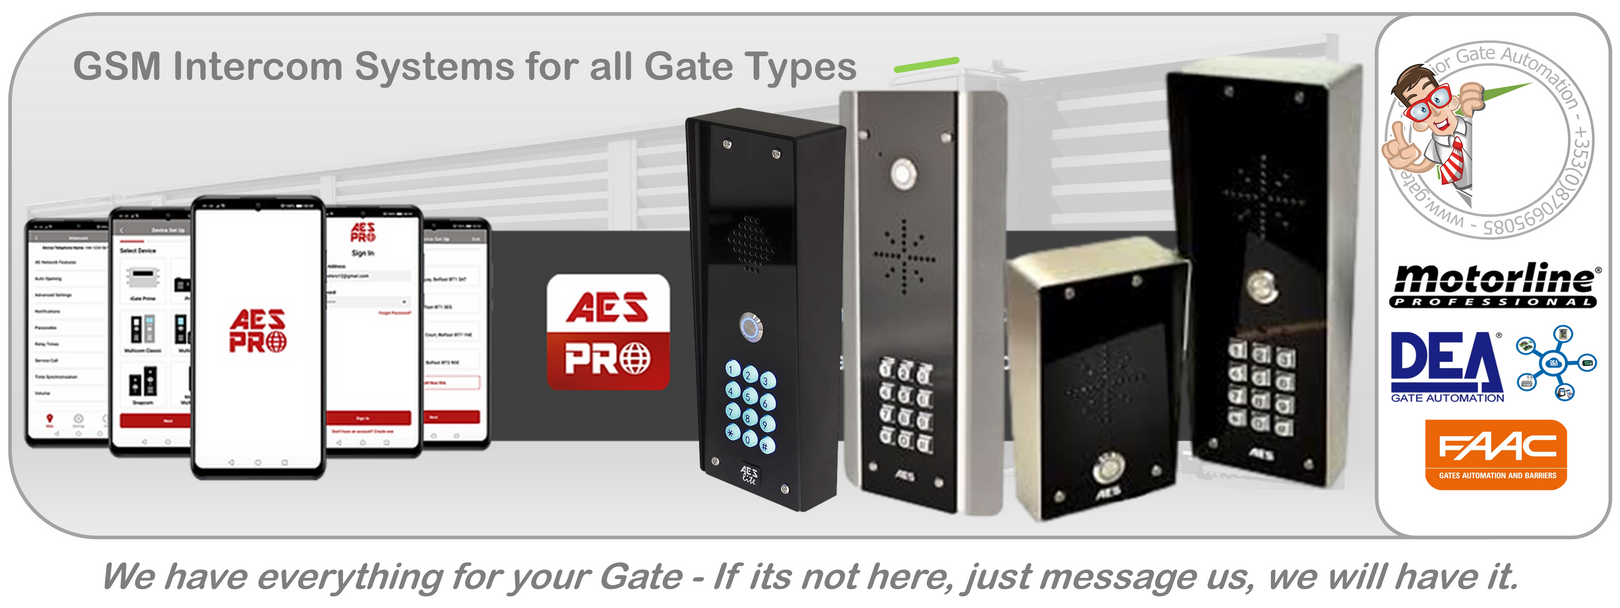 GSM Intercom Systems for all Gate Types